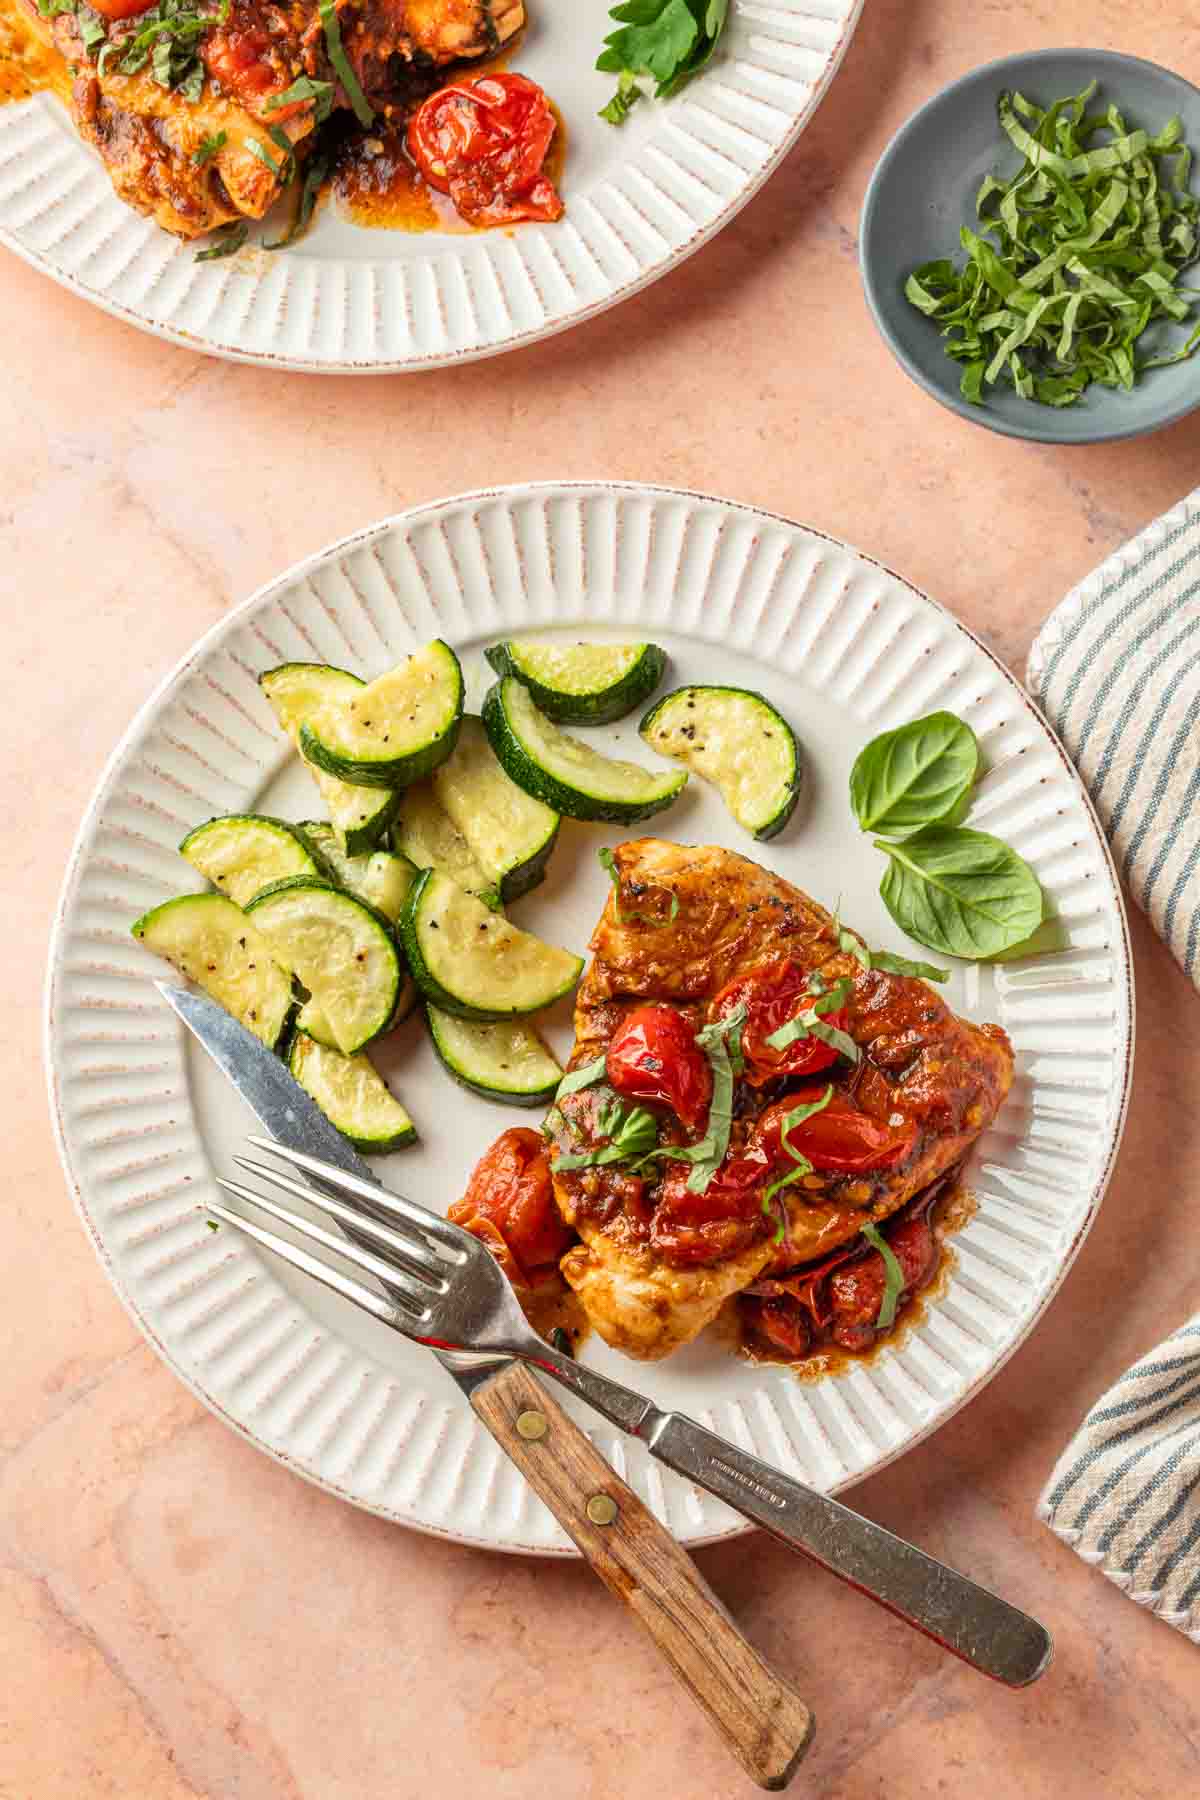 Chicken pomodoro on a plate with roasted zucchini slices.